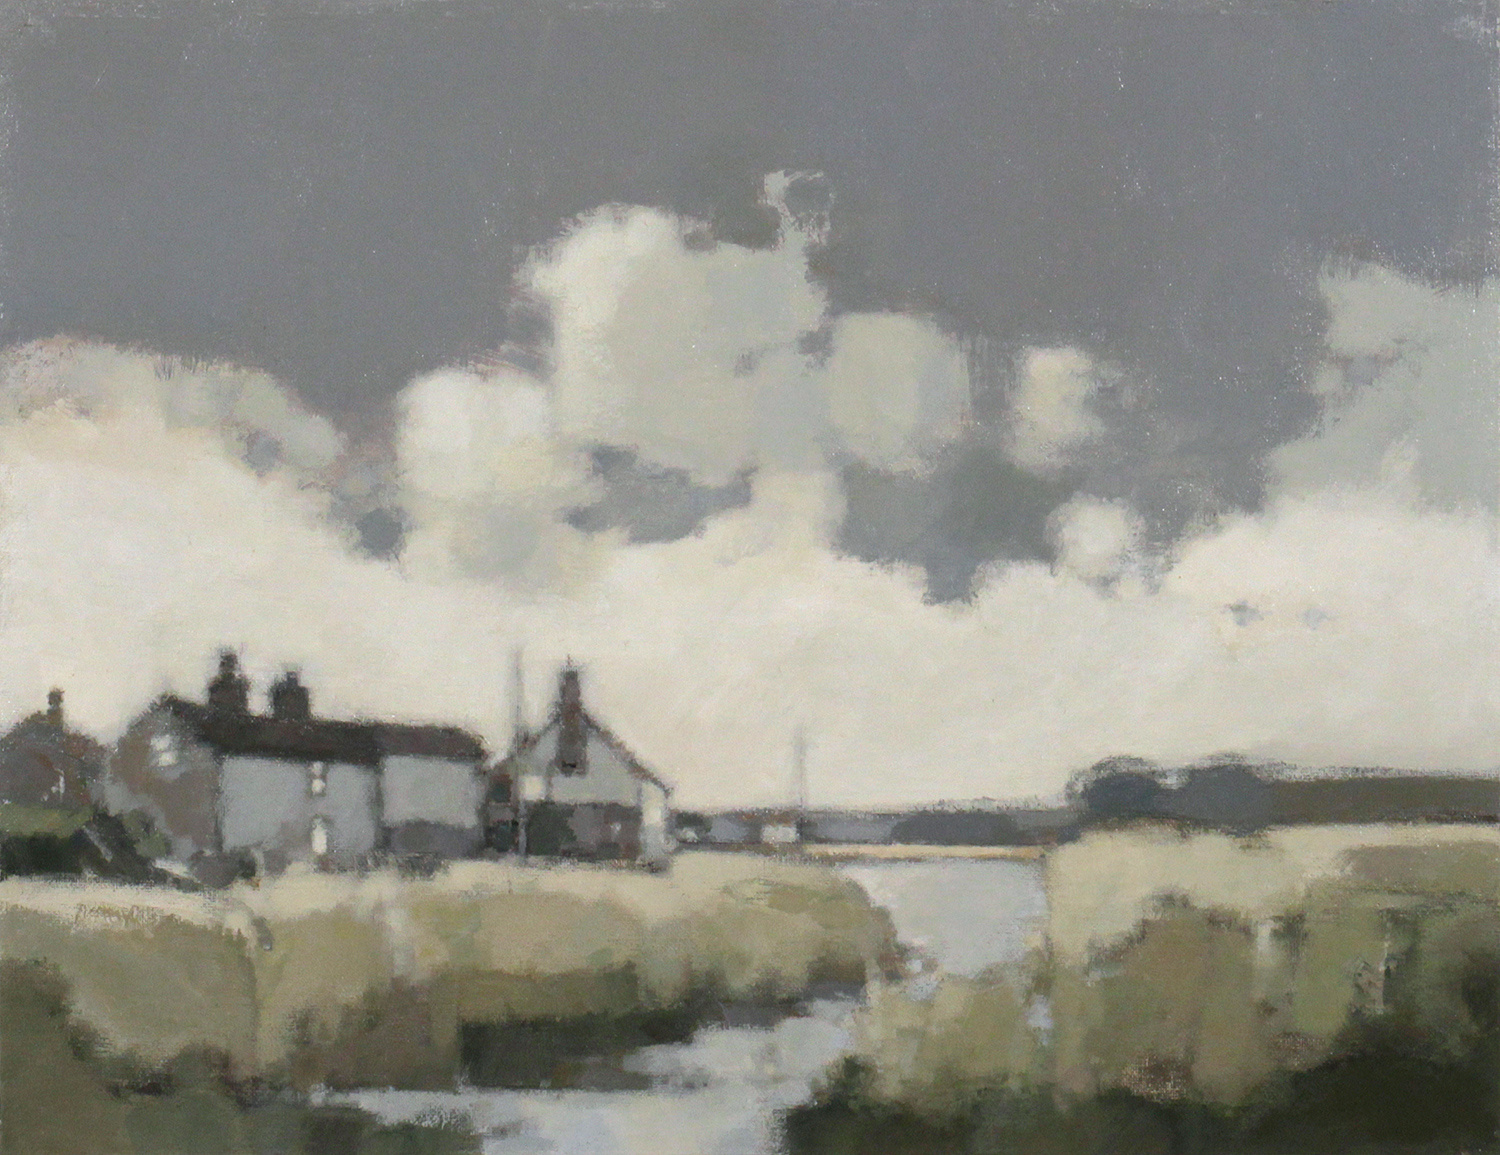 Salthouse Cottages by John Newland